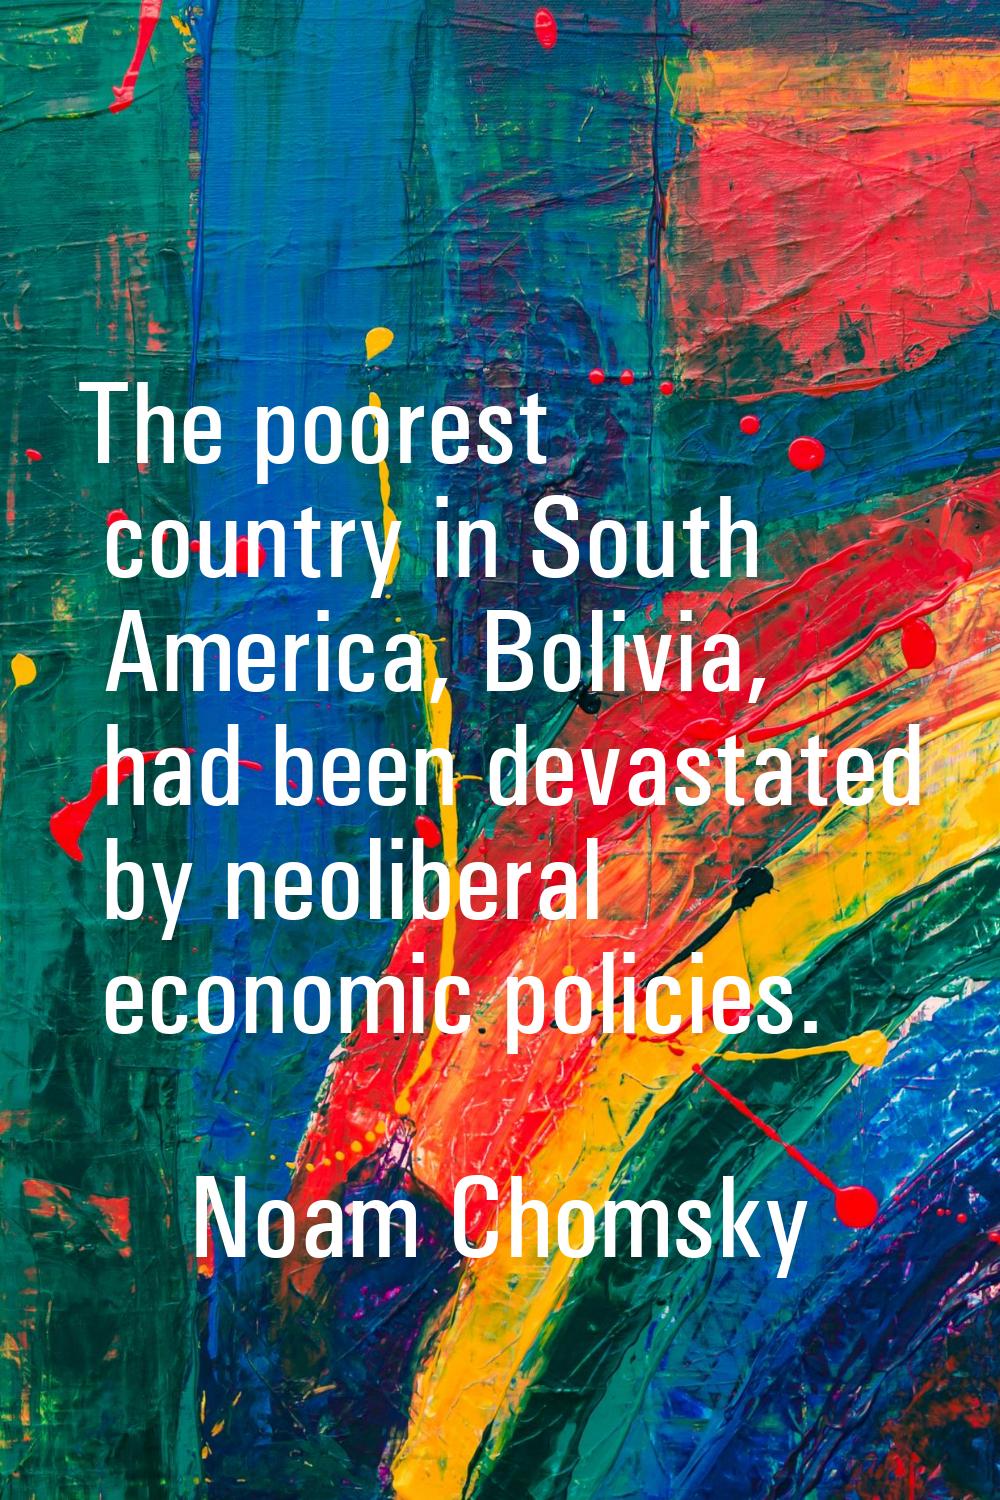 The poorest country in South America, Bolivia, had been devastated by neoliberal economic policies.